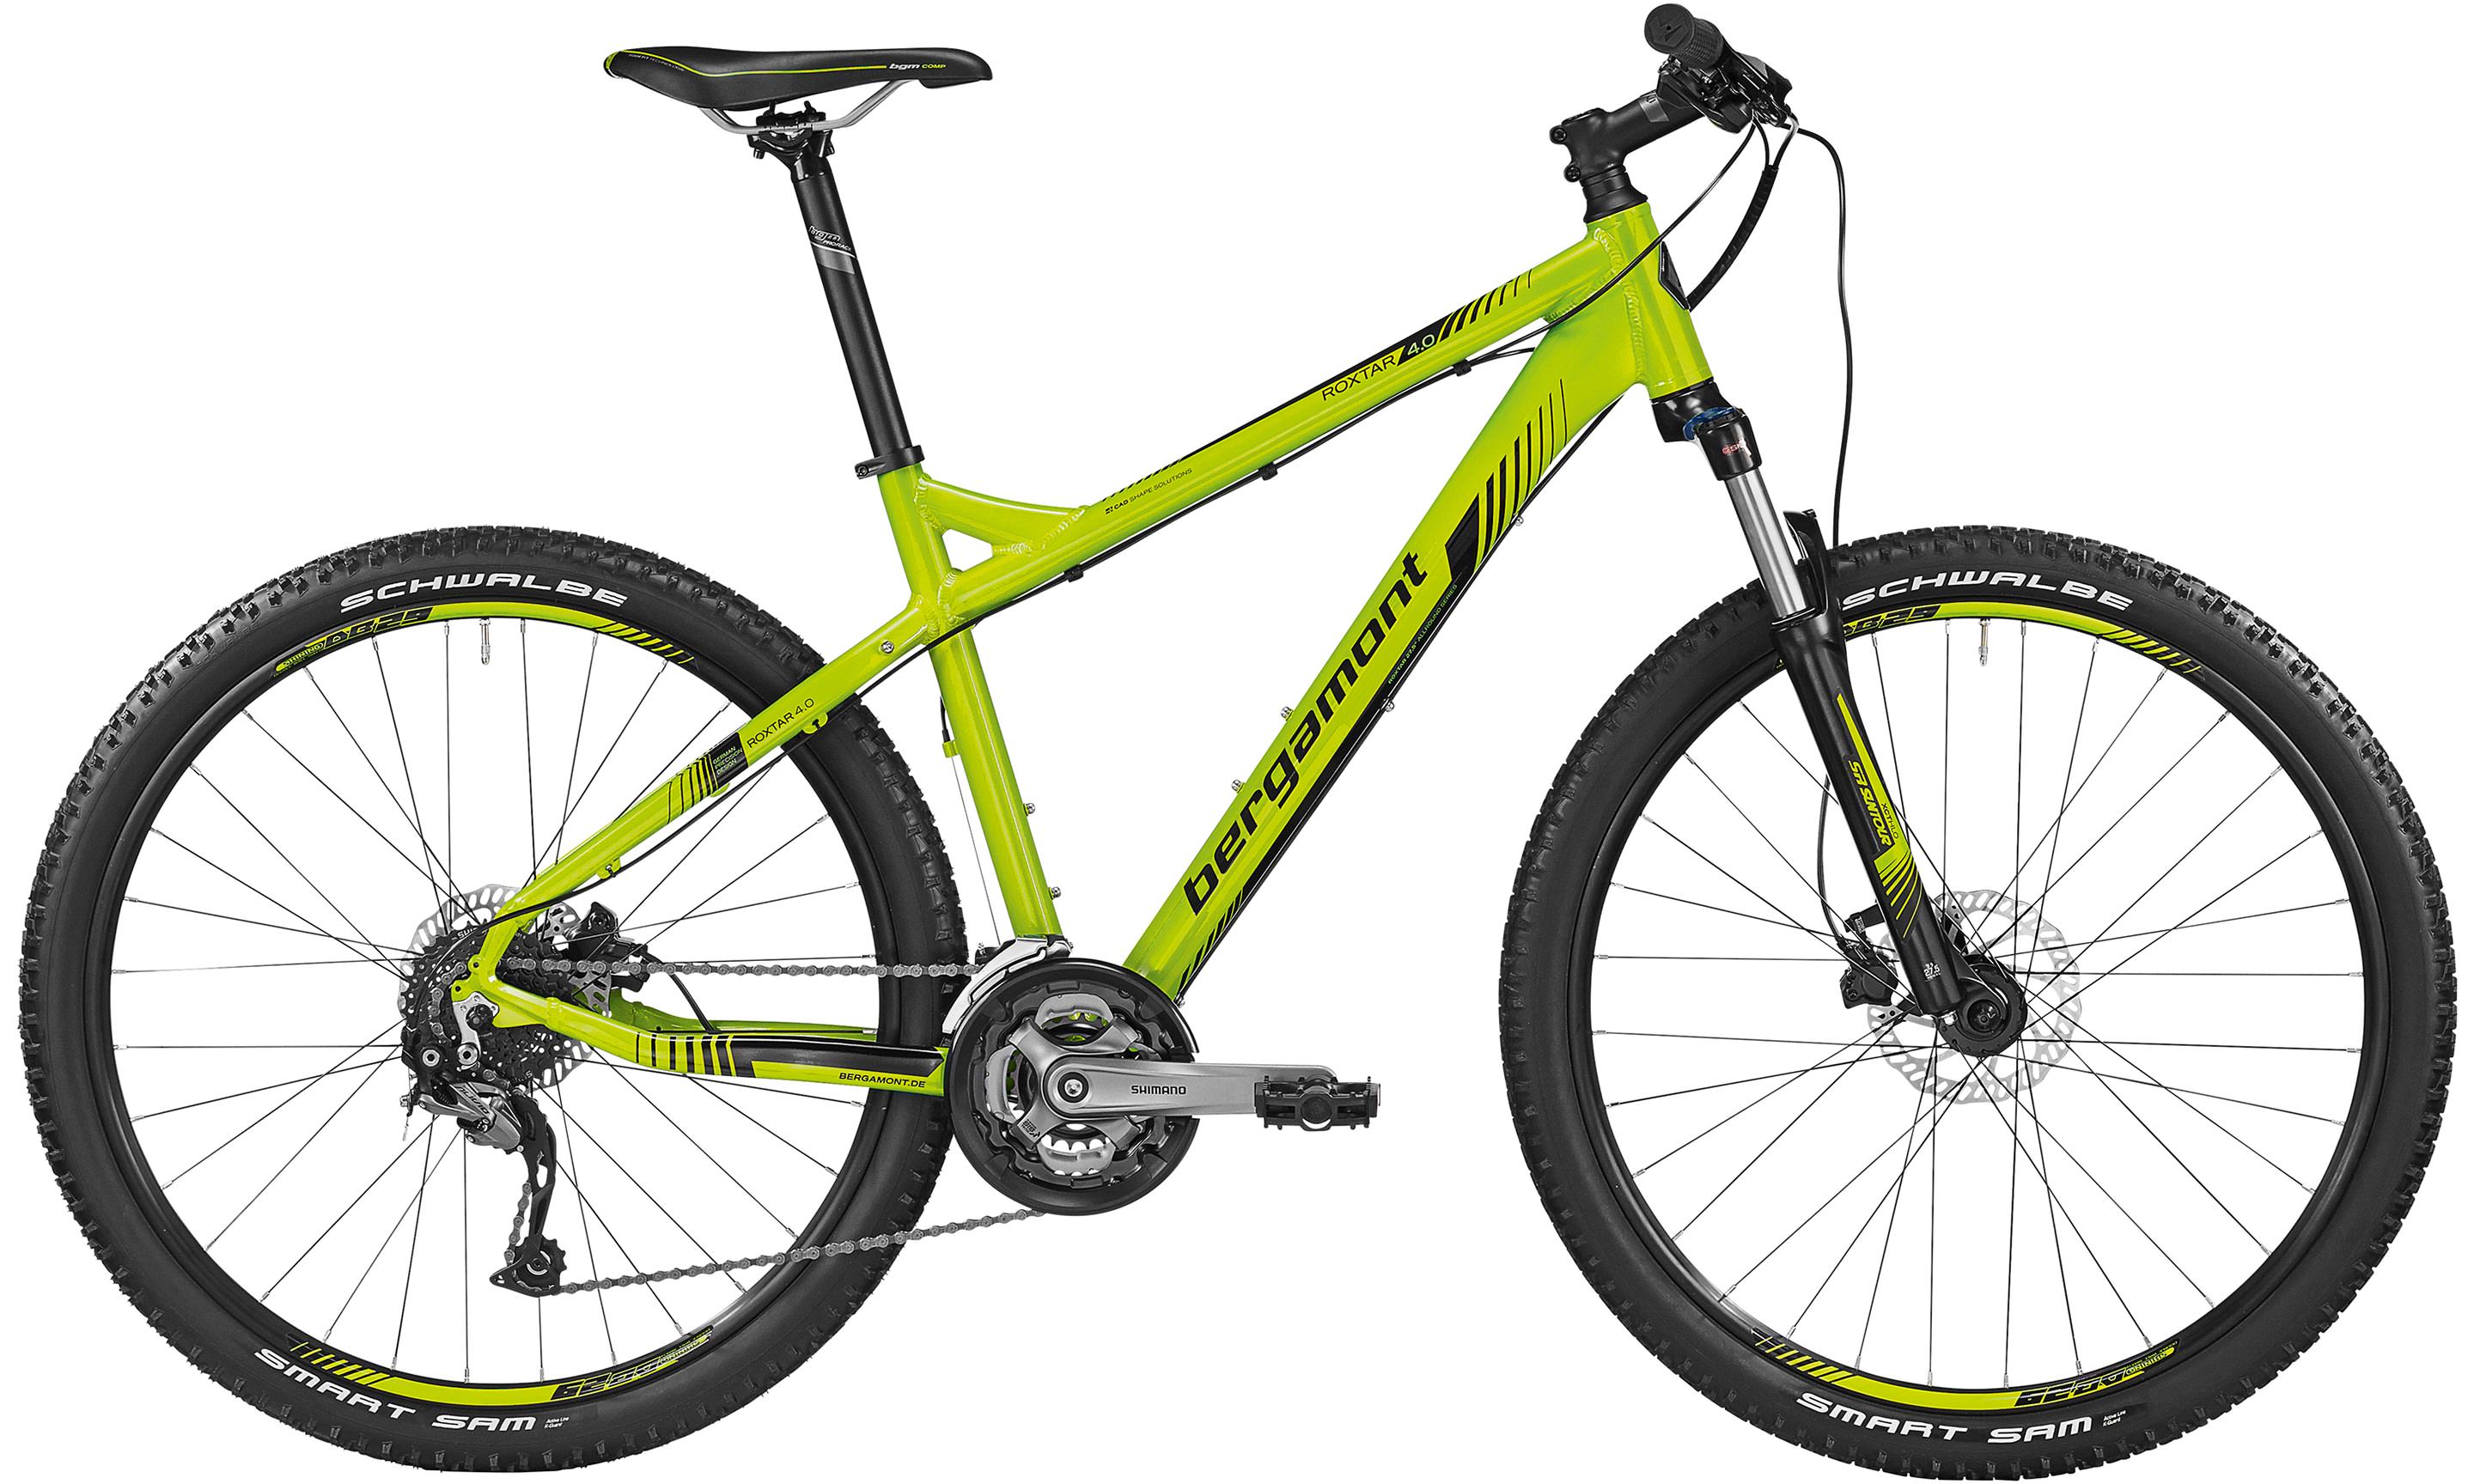 Roxtar 4.0 - green | Bouticycle